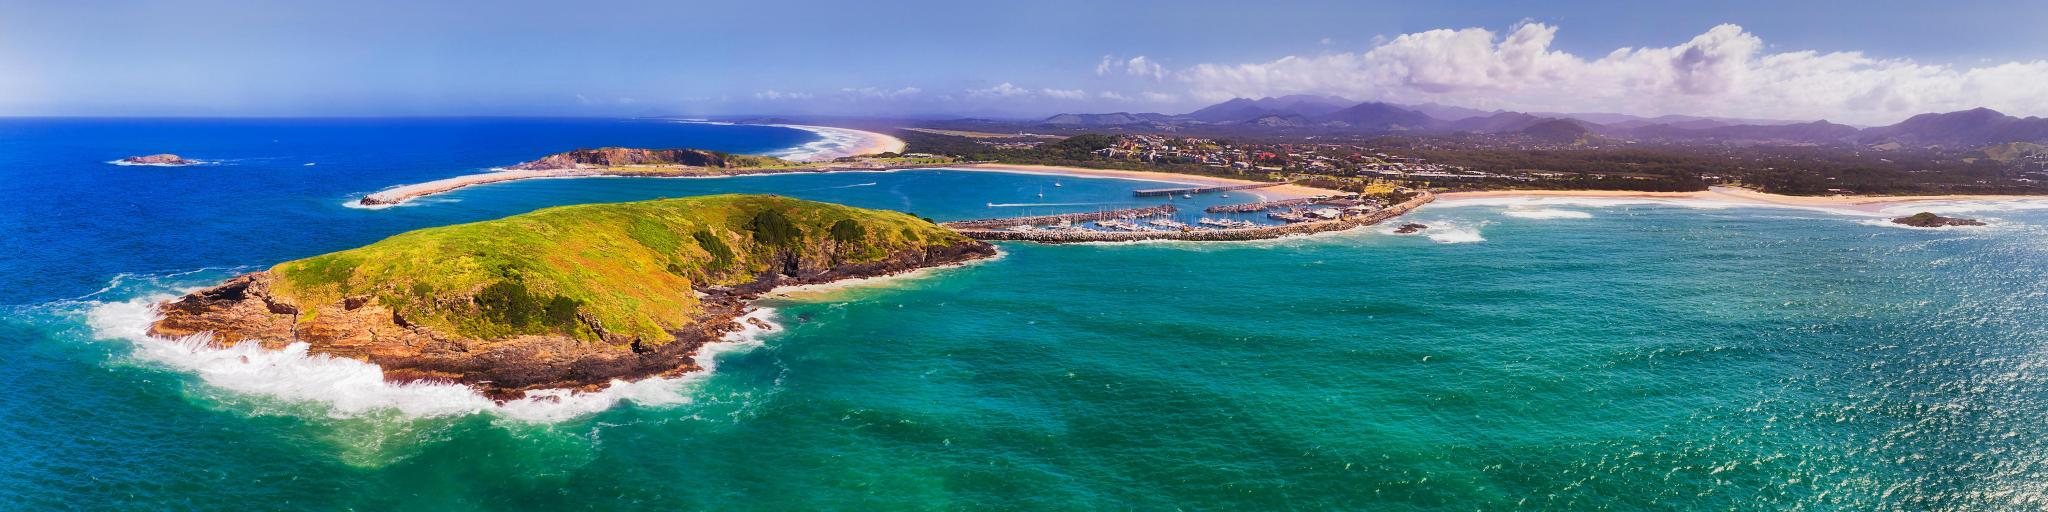 Coffs Harbour, Australia showing Muttonbirds Island and the Marina in the distance with sandy beaches on a sunny day.